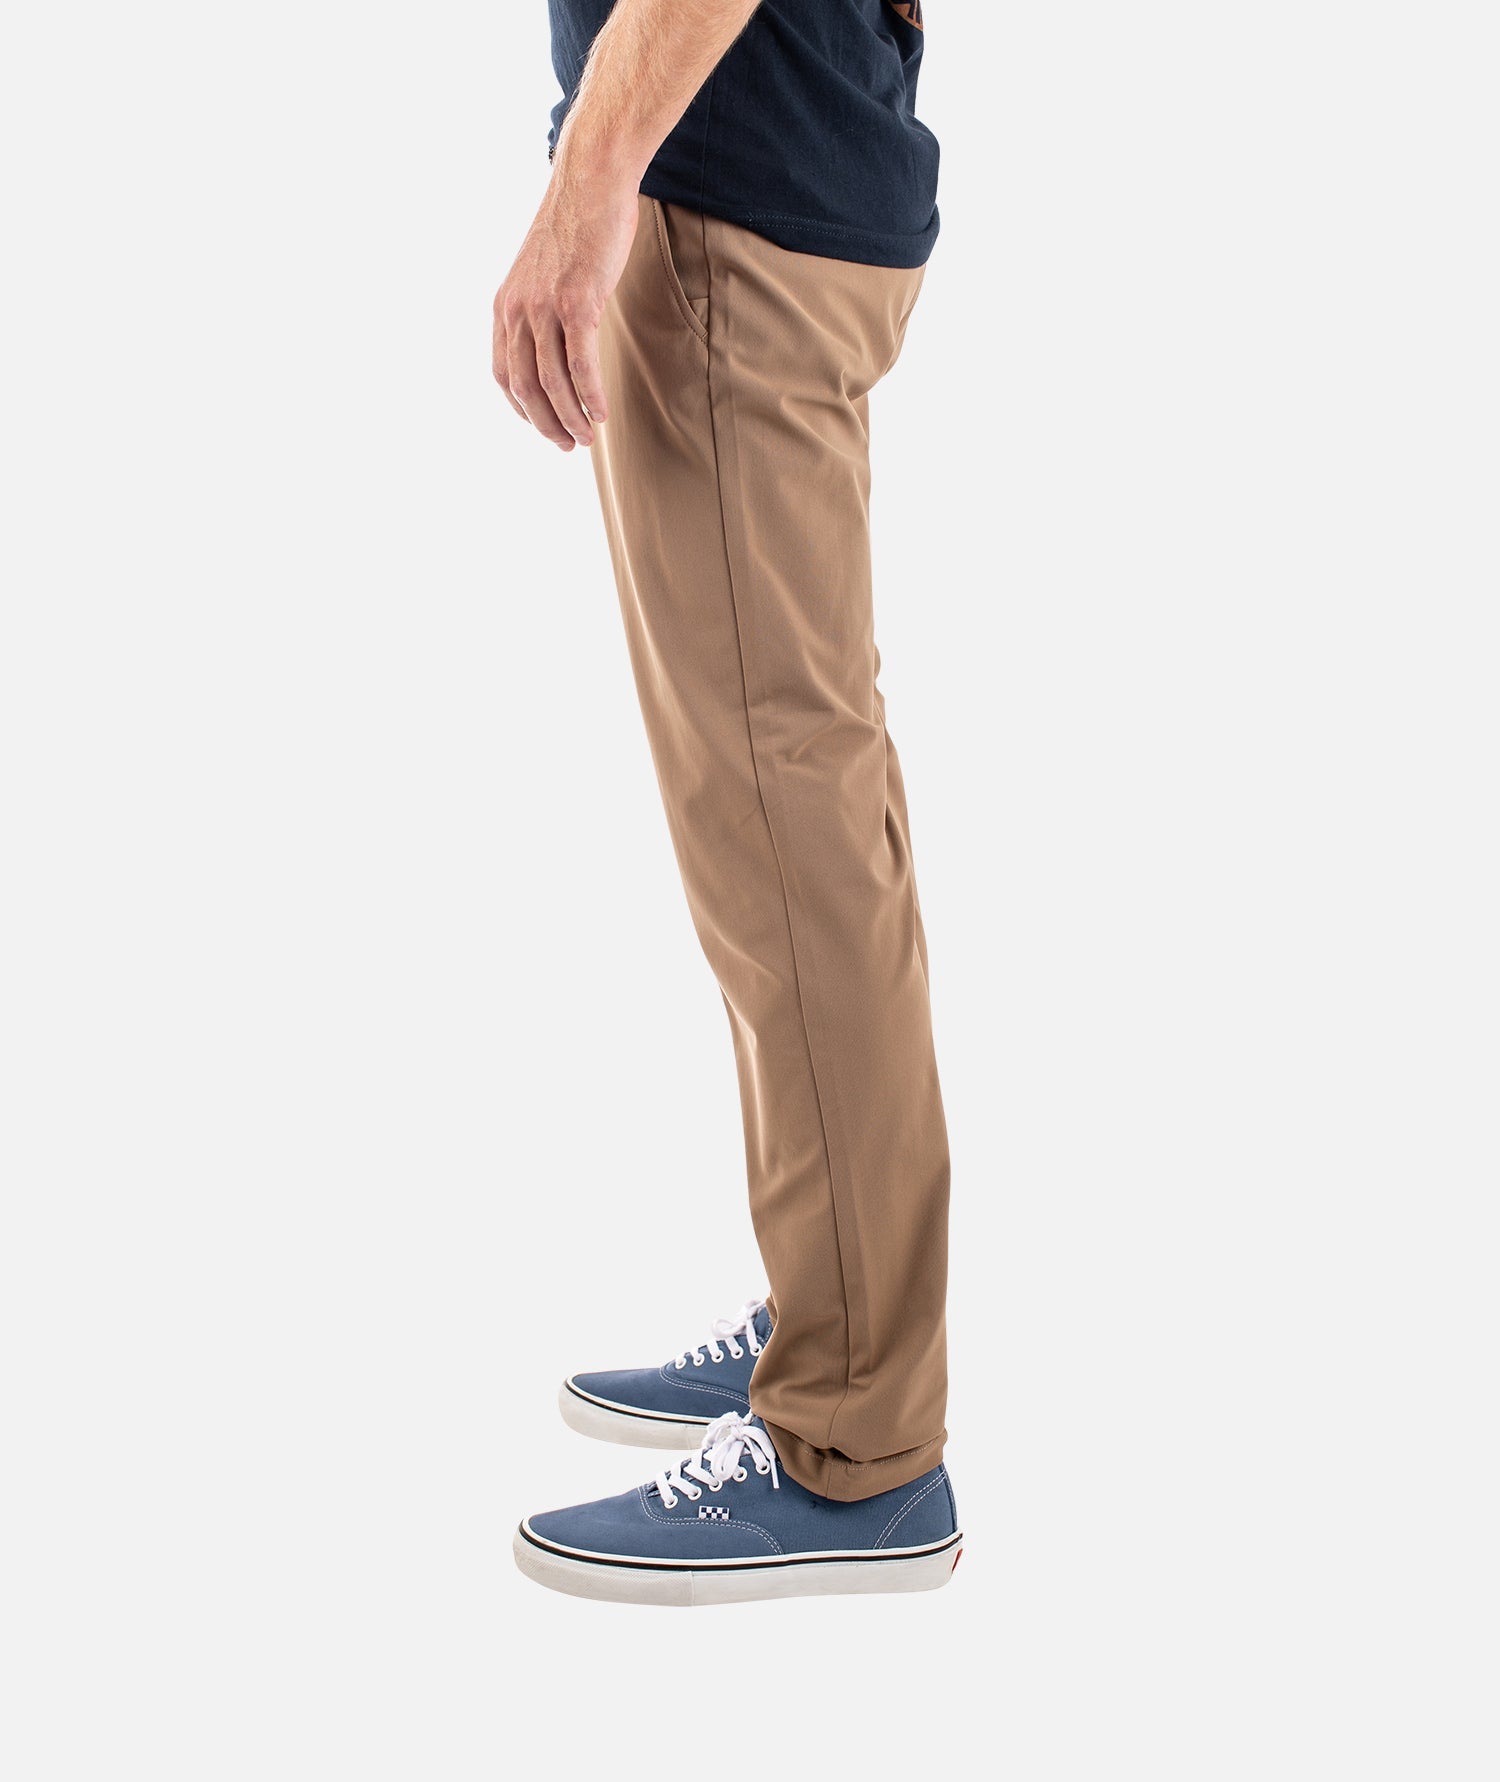 Jetty York Lined Pants